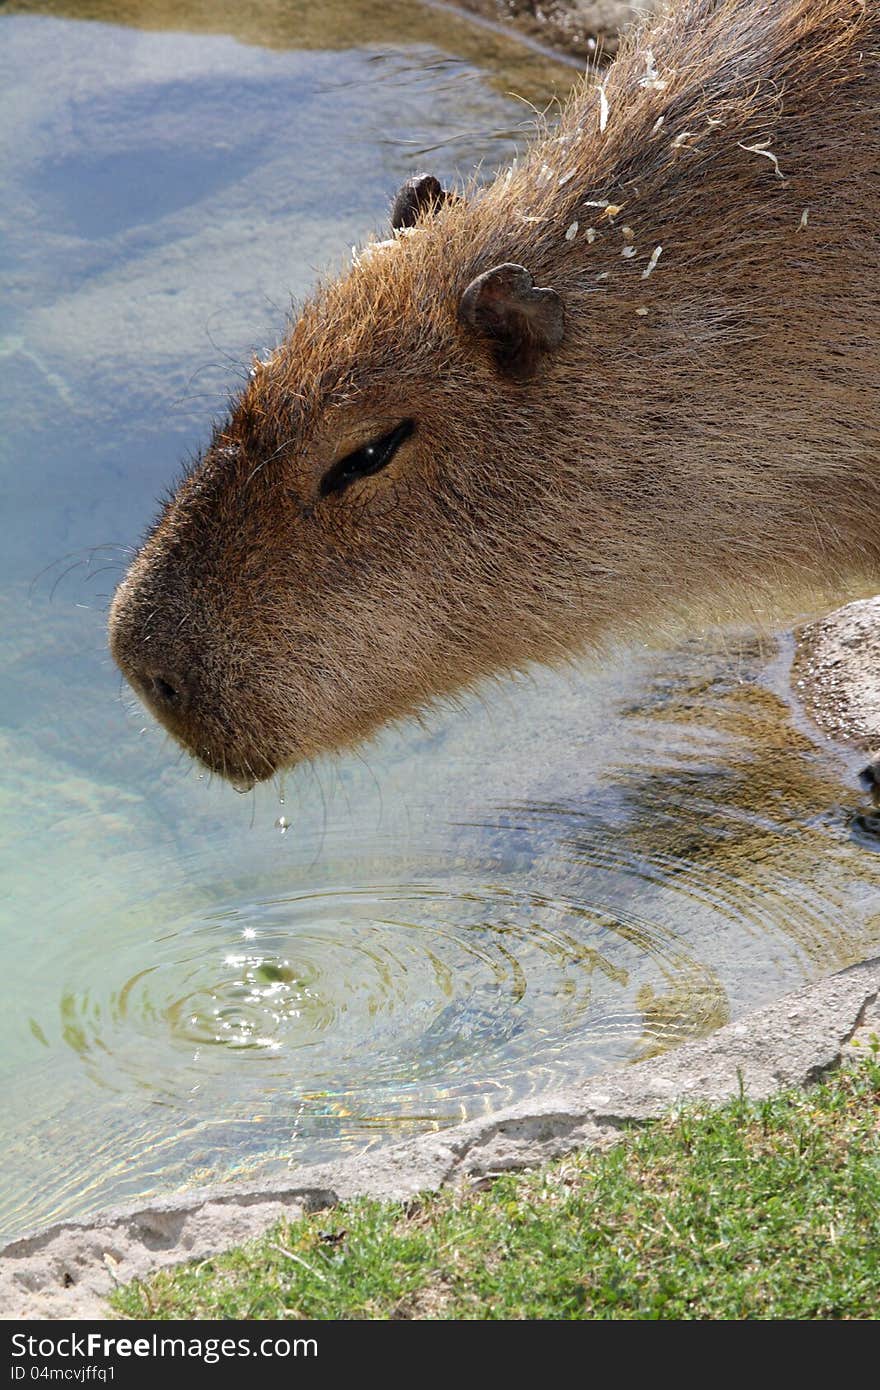 Large Aquatic Rodent Drinking From A Pool Of Water. Large Aquatic Rodent Drinking From A Pool Of Water